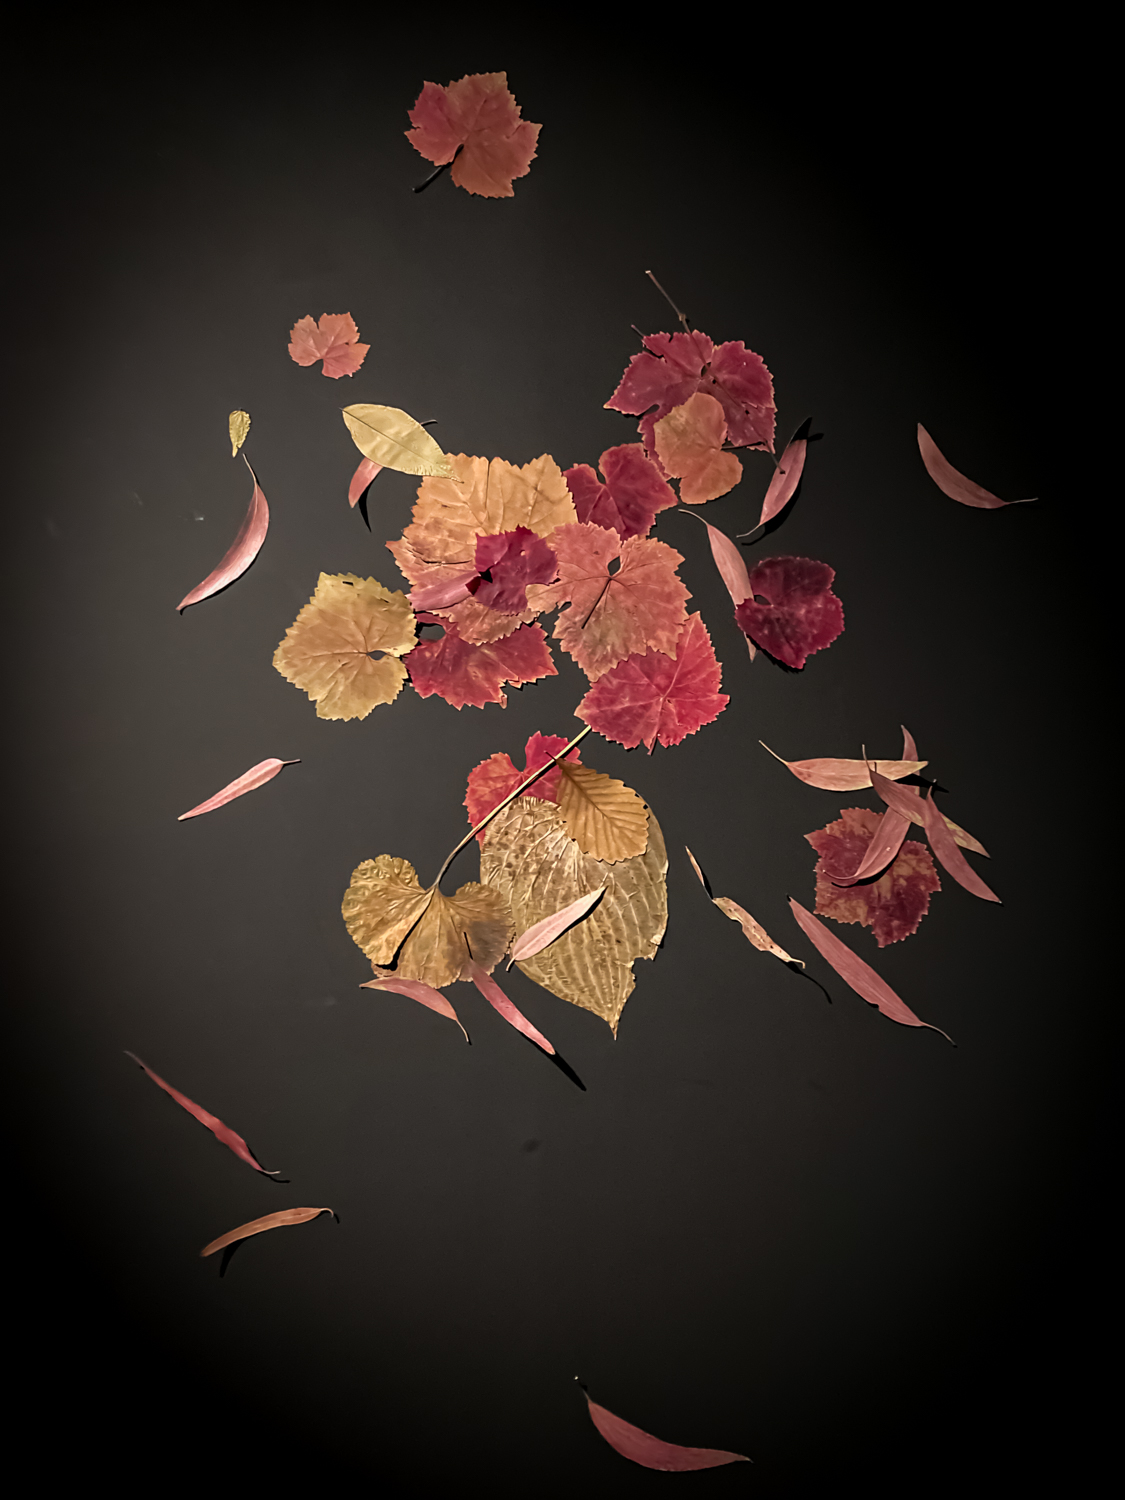 A collage of red and yellow leaves on a black background